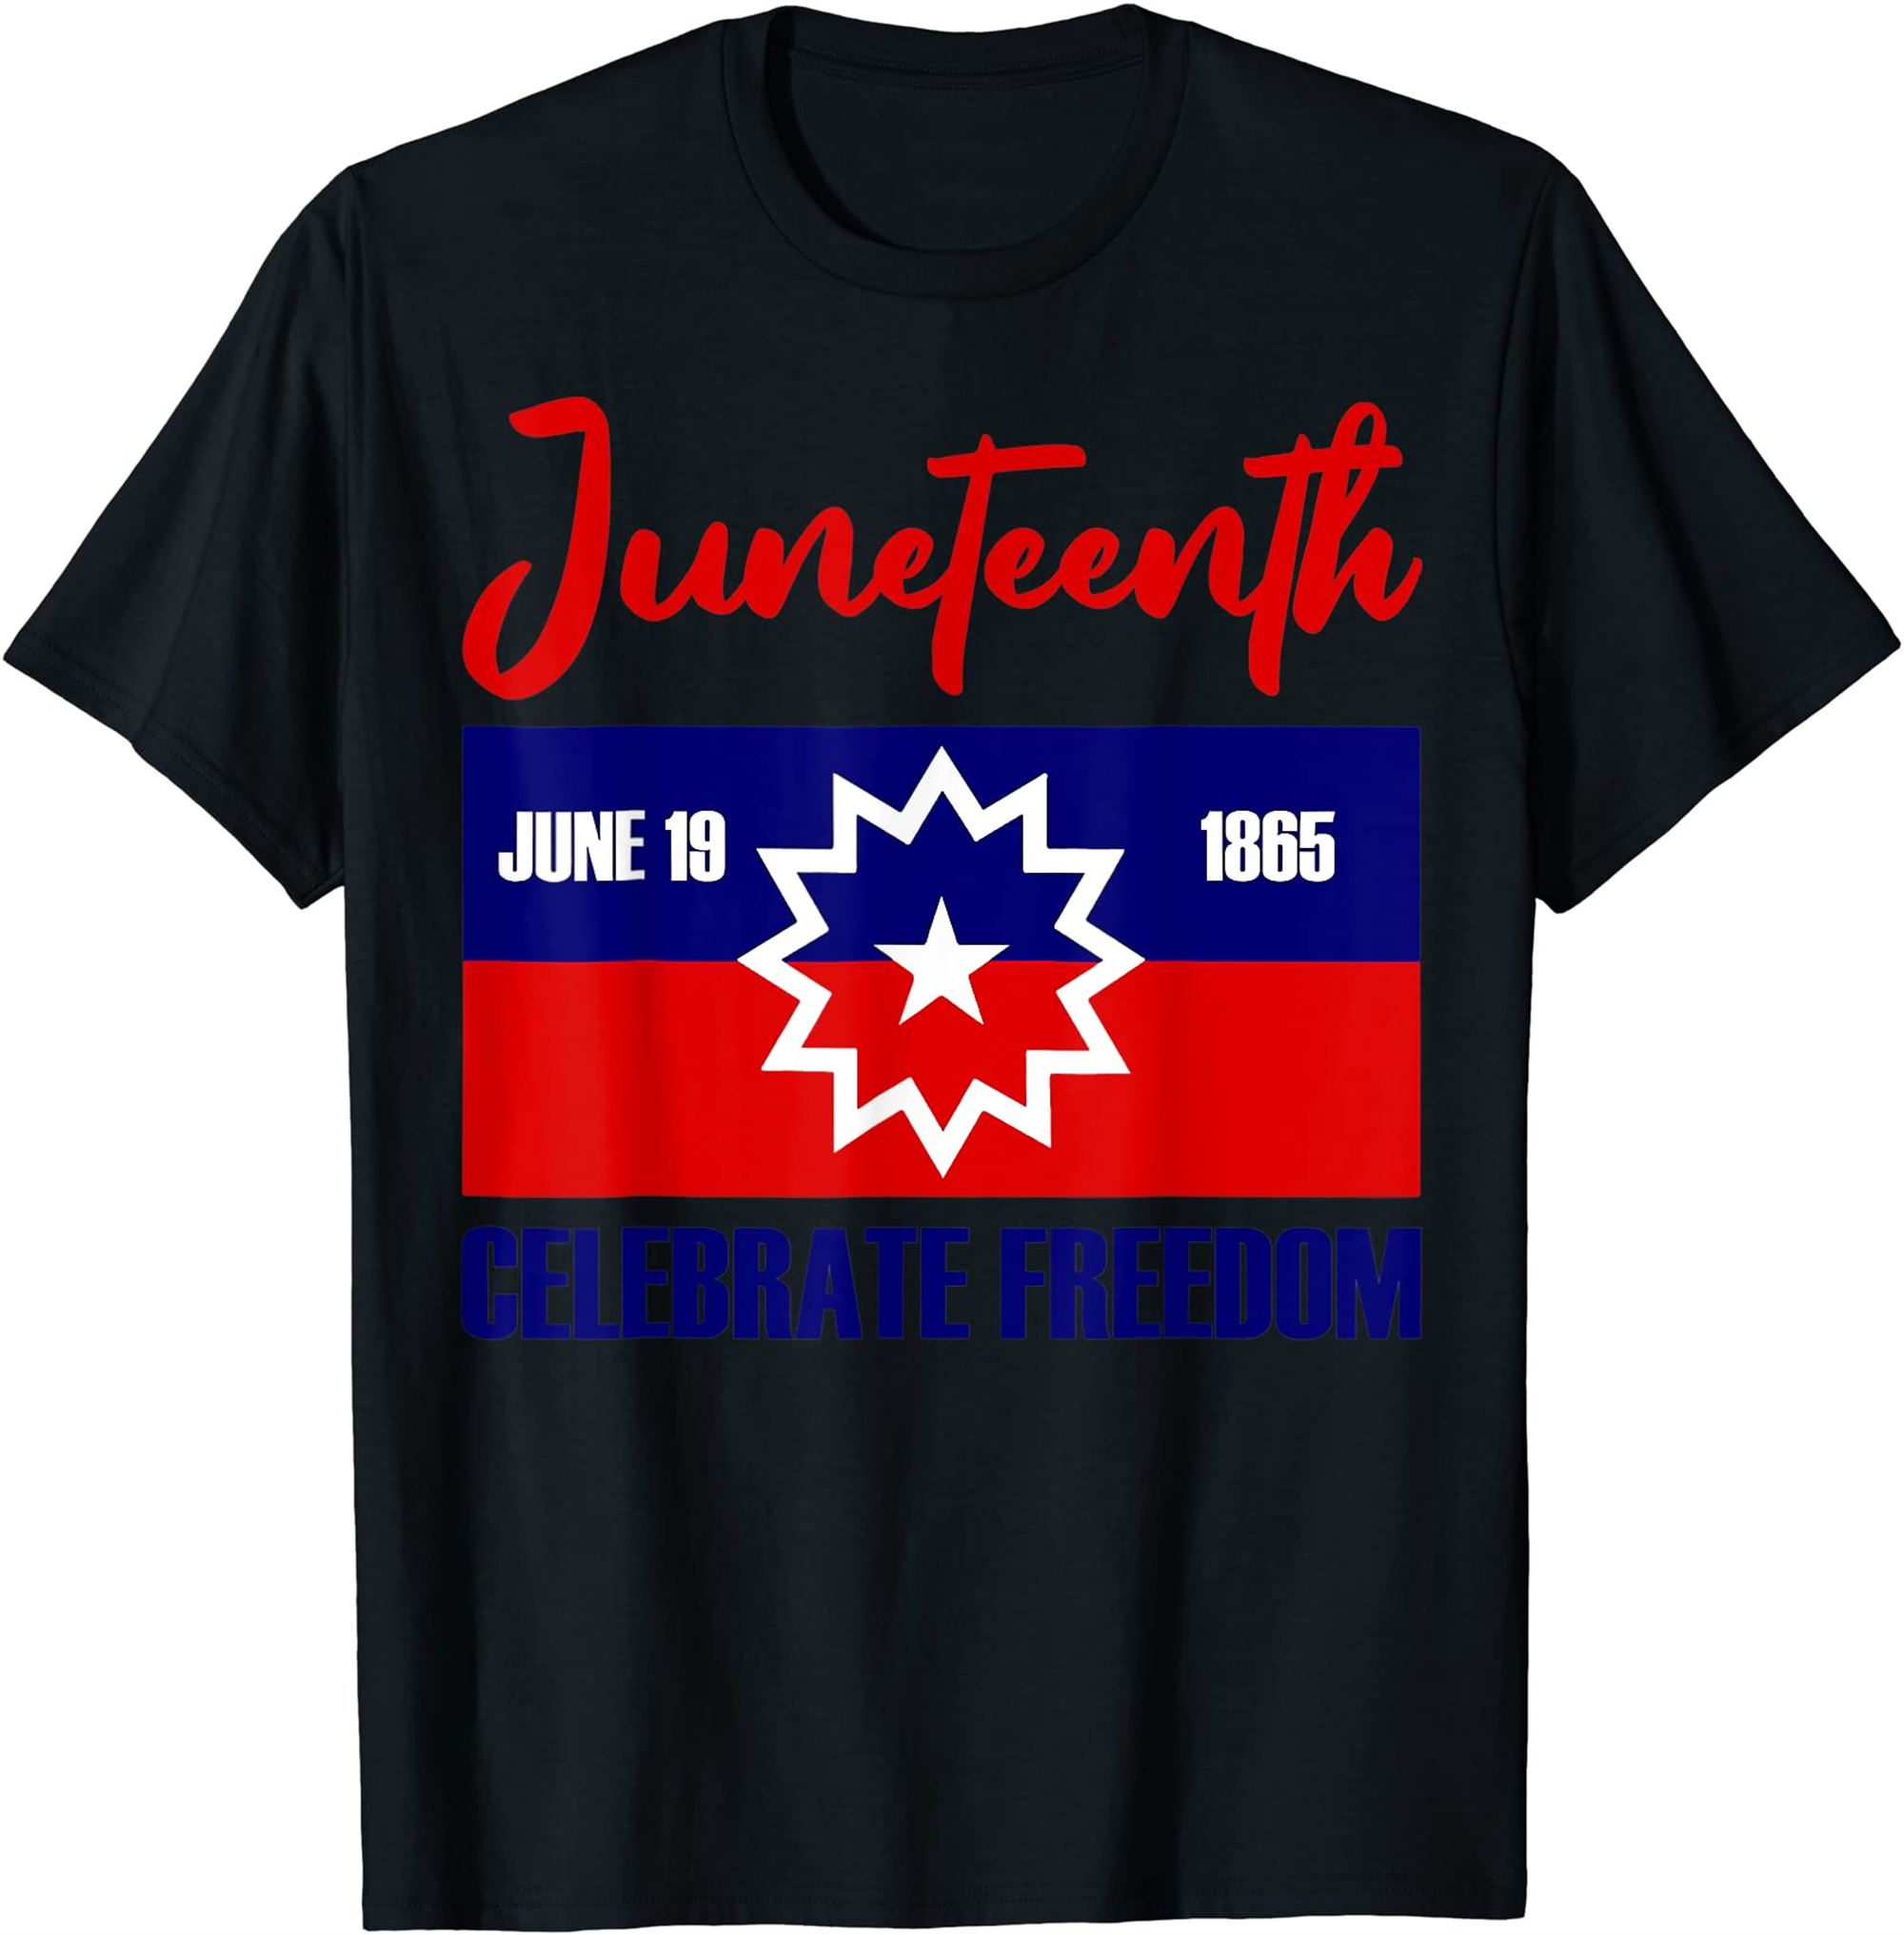 Juneteenth Celebrate Freedom Red White Blue Free Black Slave T-shirt Full Size Up To 5xl